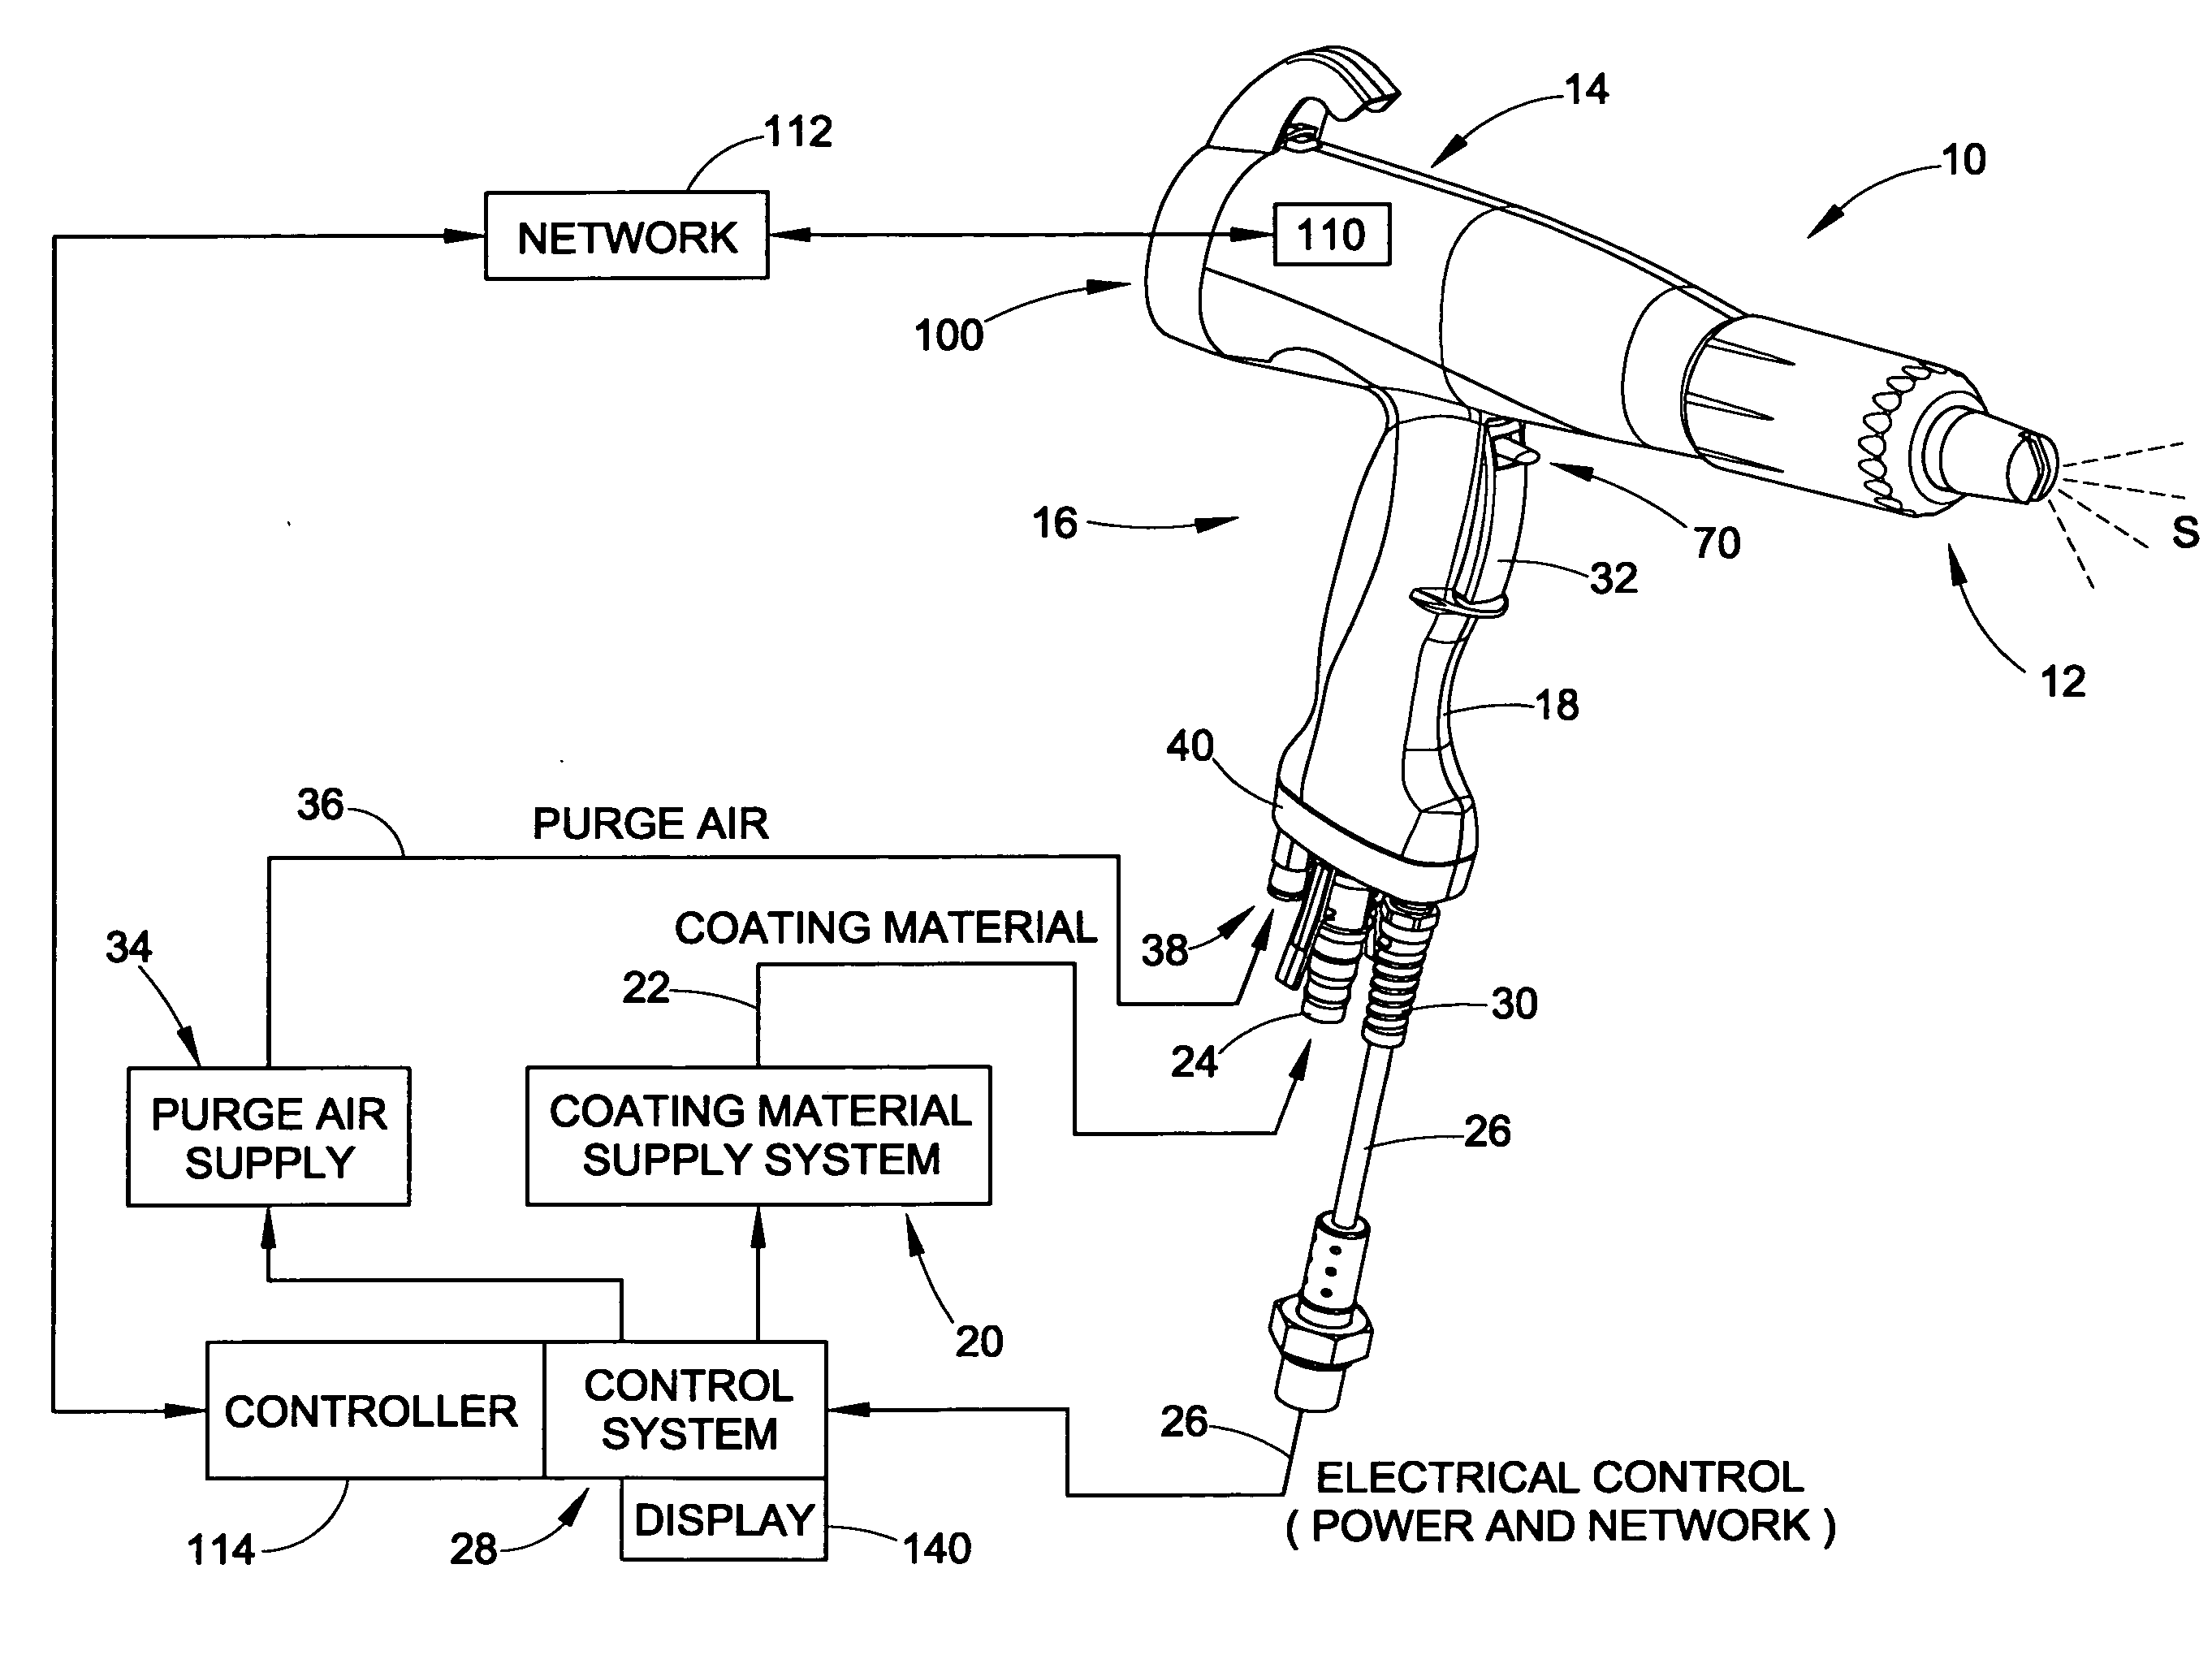 Control function and display for controlling spray gun